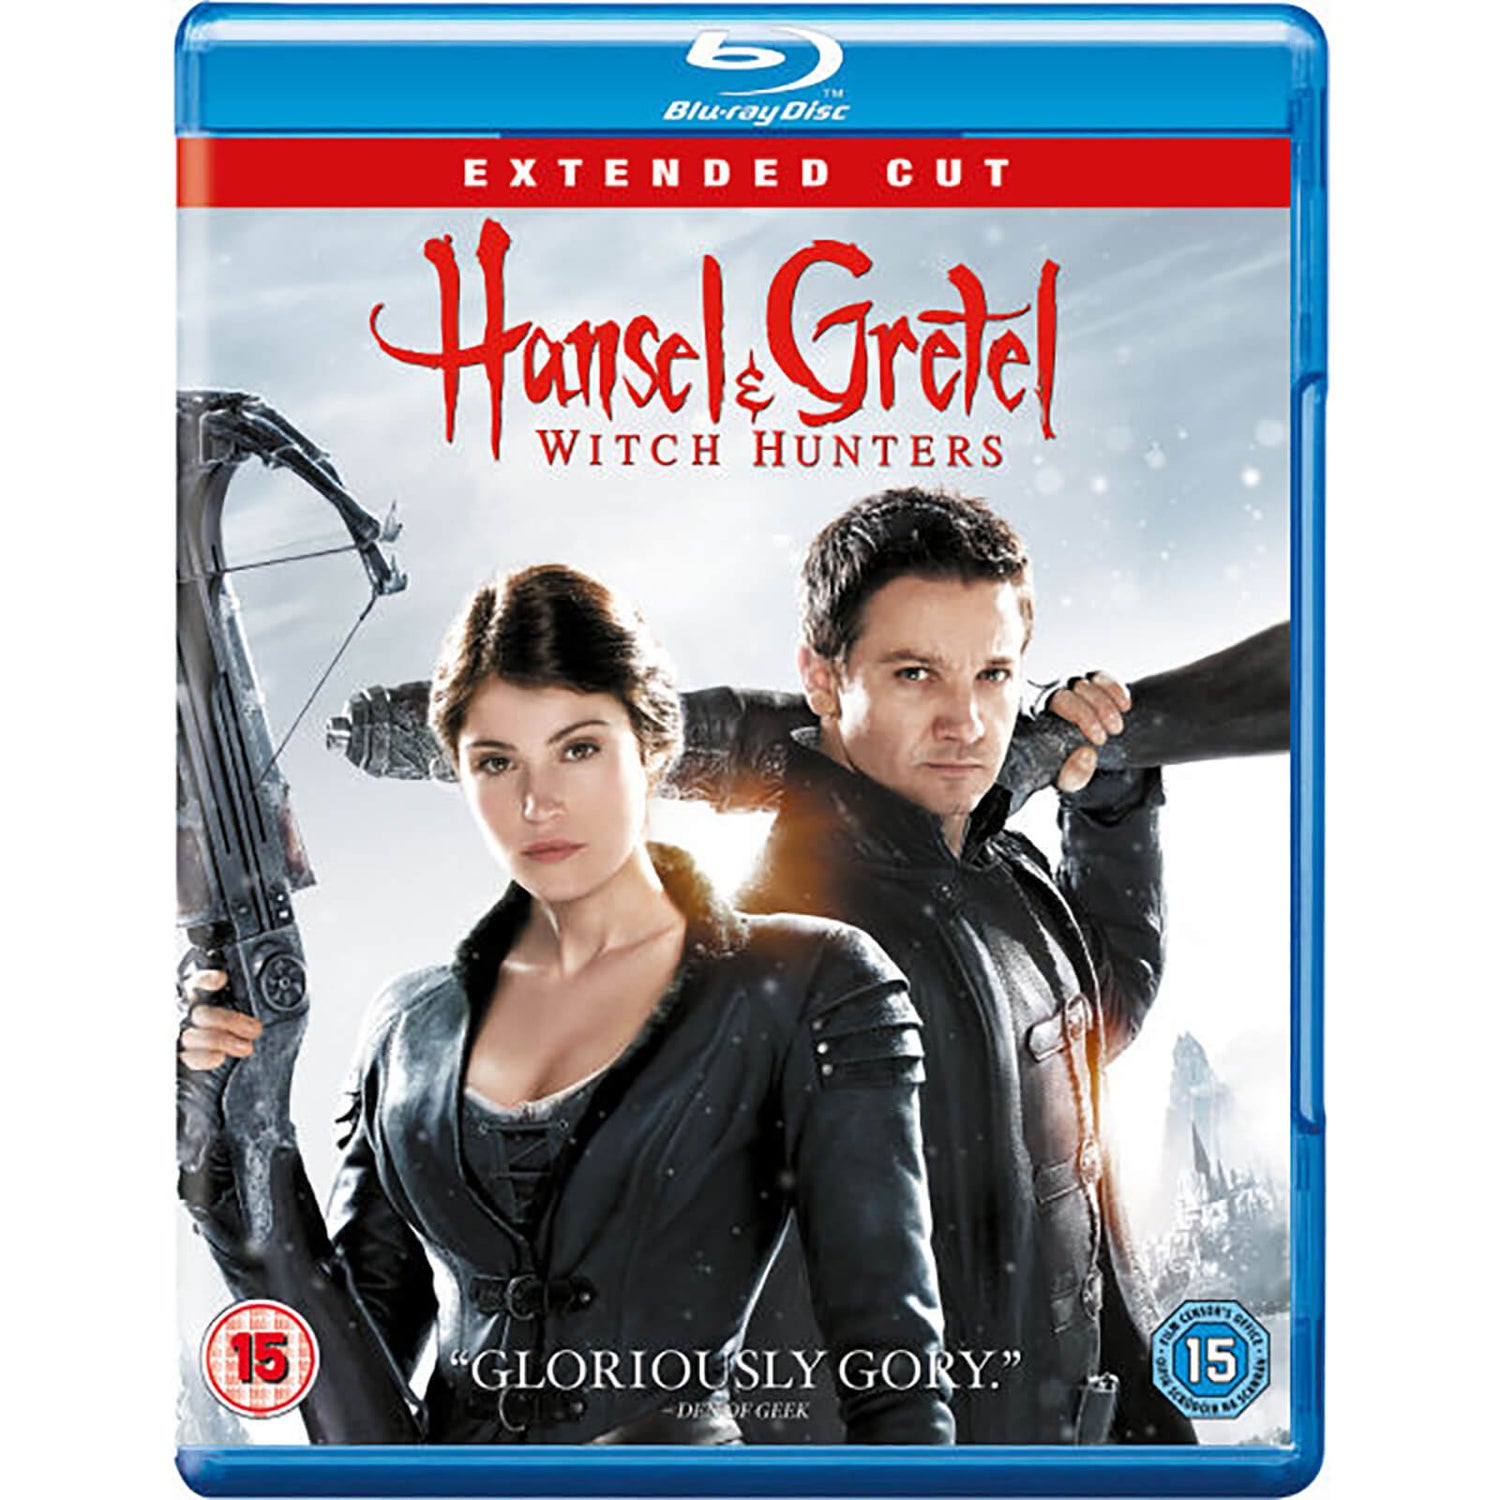 Hansel and Gretel: Witch Hunters - Extended Cut